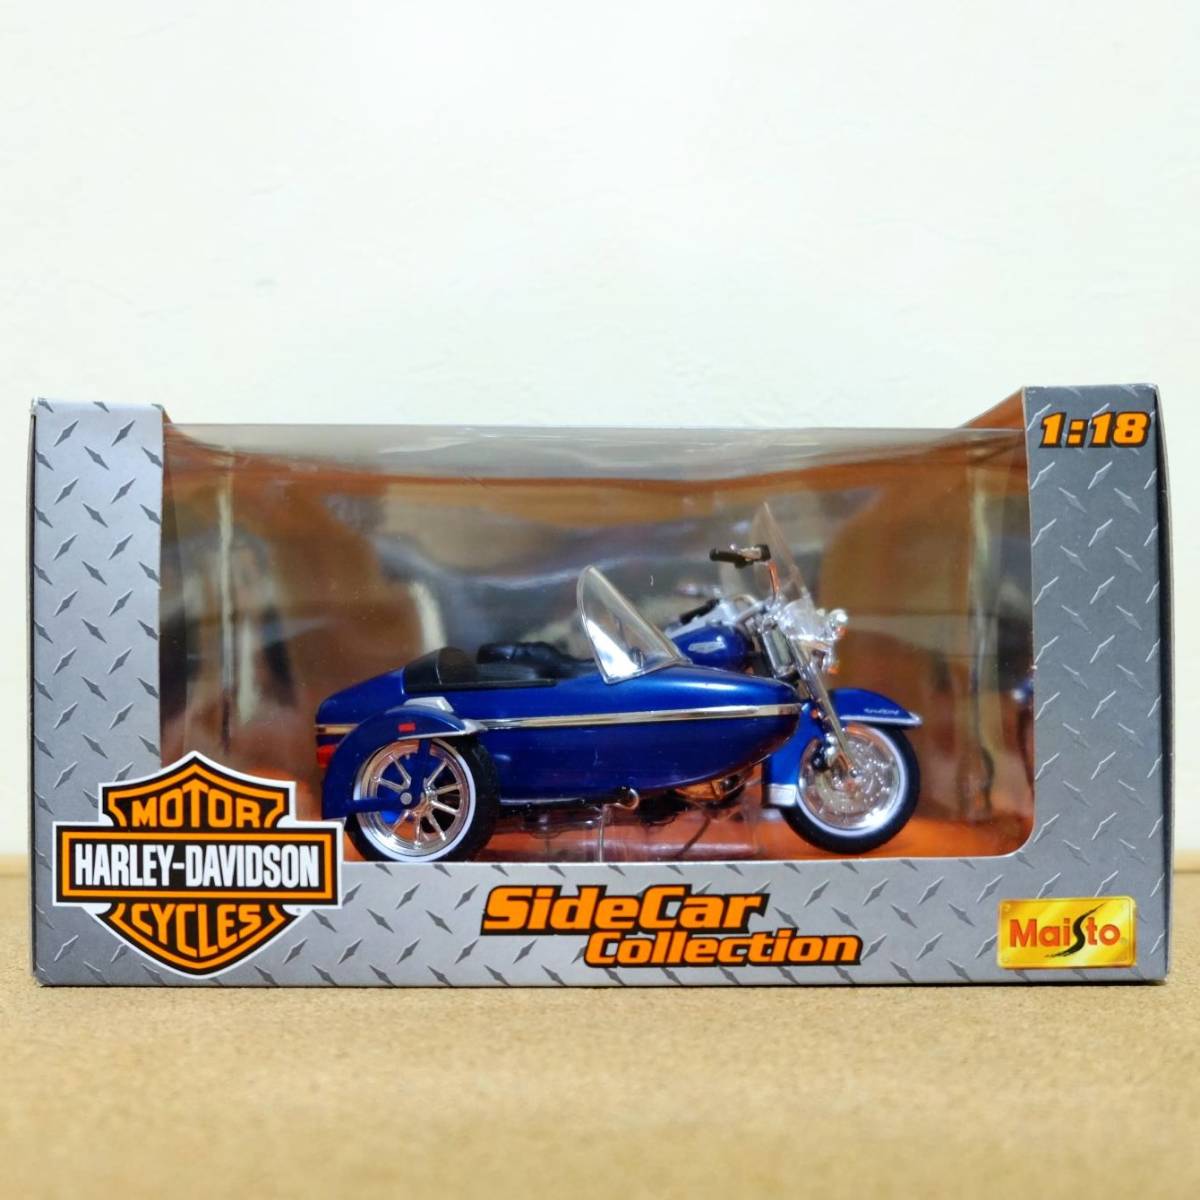 【Maisto】2001 FLHRC Road King Classic(BLU) 1/18 HARLEY-DAVIDSON SideCar Collection